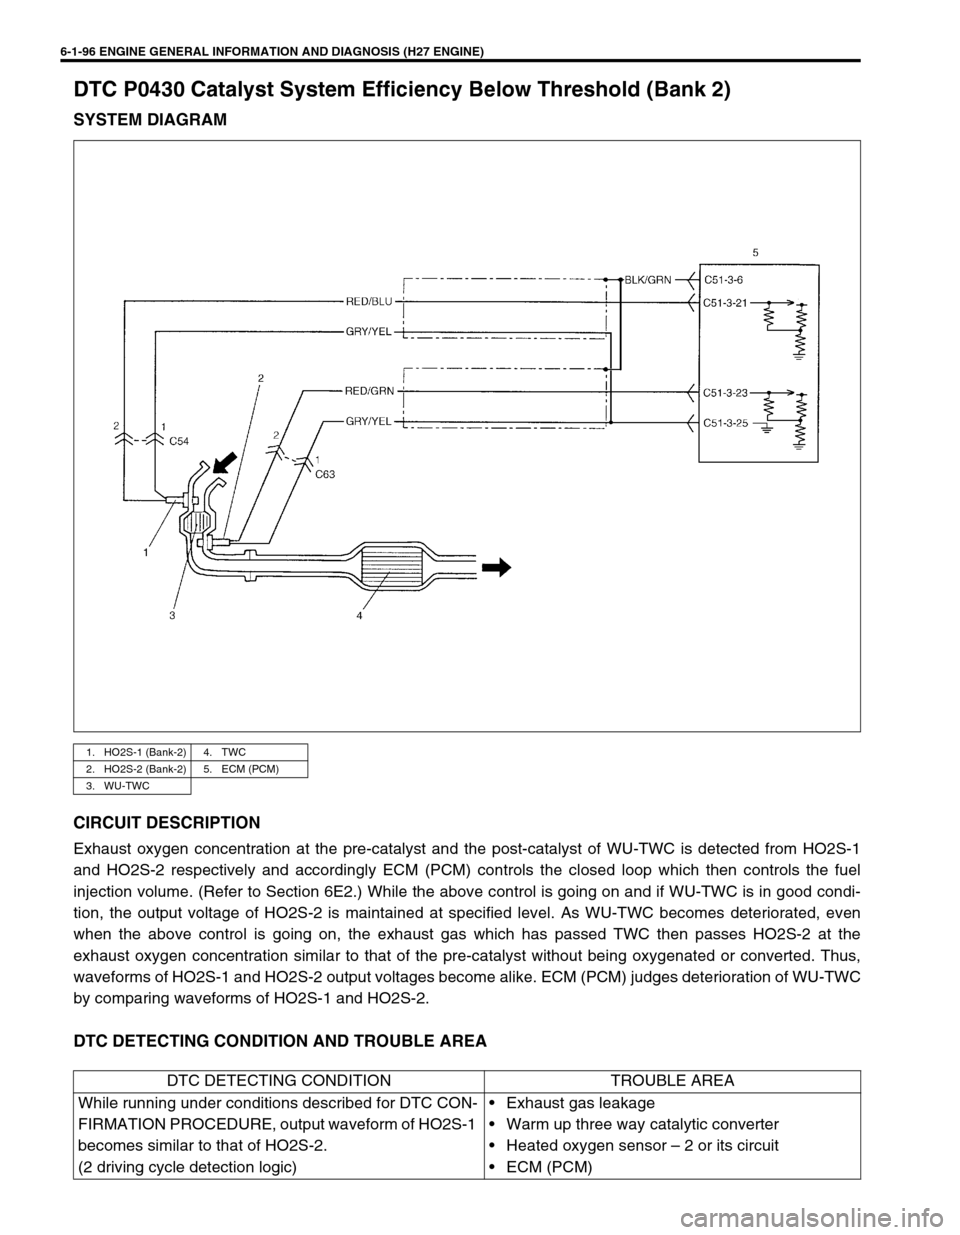 SUZUKI GRAND VITARA 2001 2.G Manual PDF 6-1-96 ENGINE GENERAL INFORMATION AND DIAGNOSIS (H27 ENGINE)
DTC P0430 Catalyst System Efficiency Below Threshold (Bank 2)
SYSTEM DIAGRAM
CIRCUIT DESCRIPTION
Exhaust oxygen concentration at the pre-ca